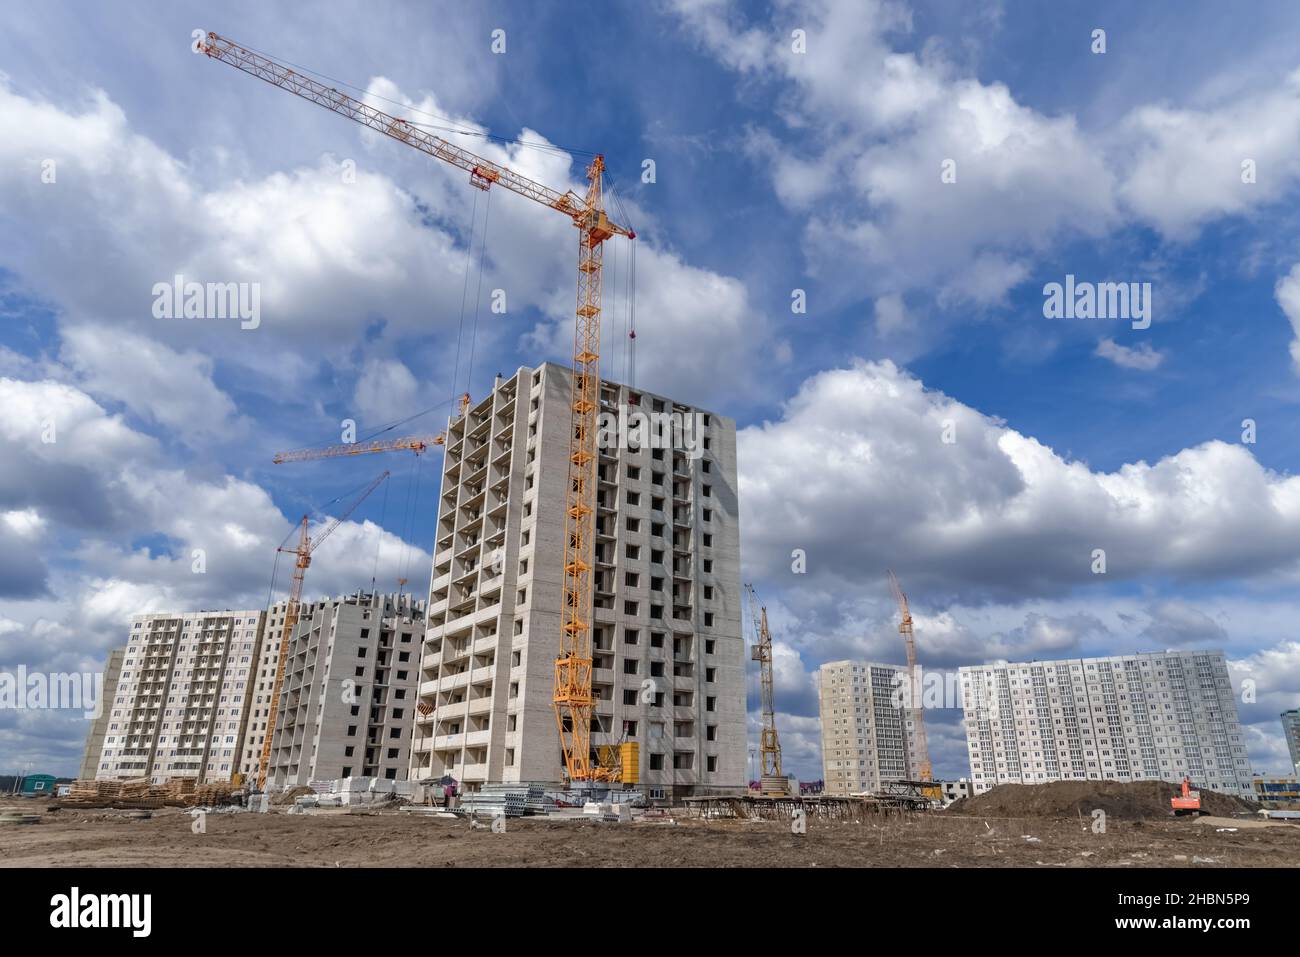 Multistory building and industrial construction cranes Stock Photo